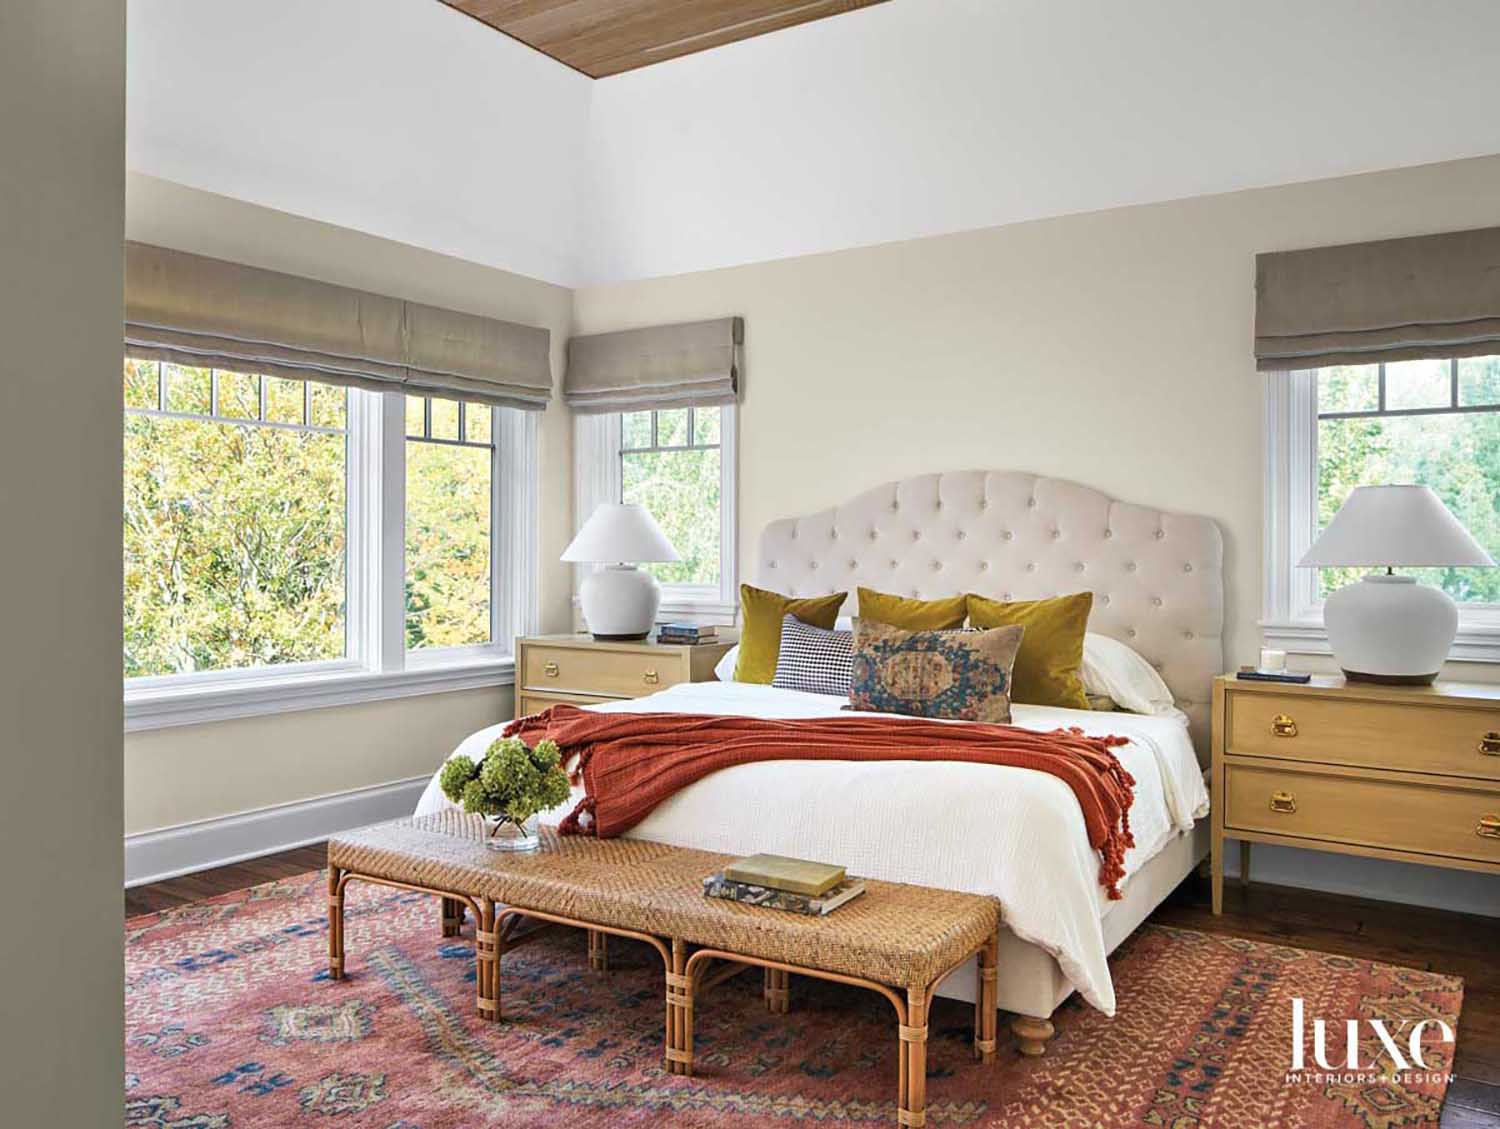 transitional bedroom brightened by a peachy-orange patterned rug under bed